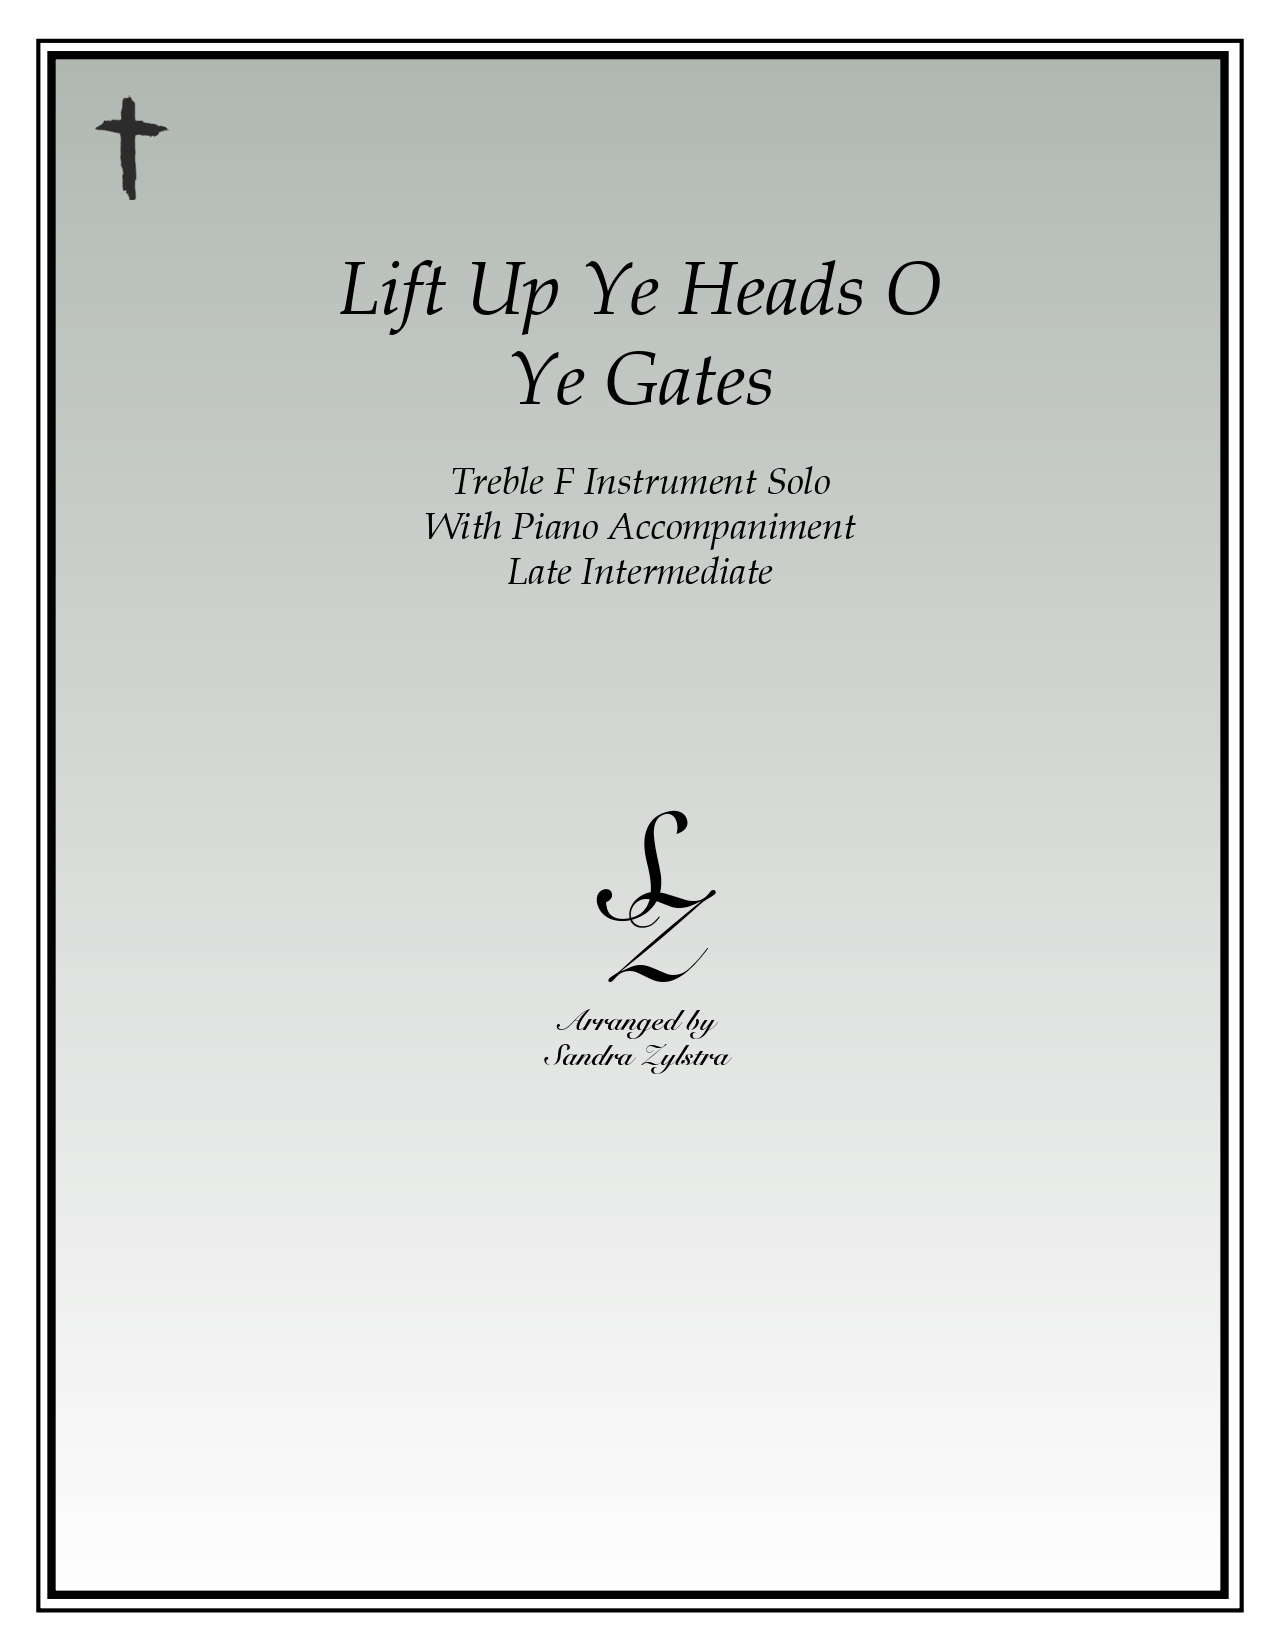 Lift Up Ye Heads O Ye Gates F instrument solo part cover page 00011